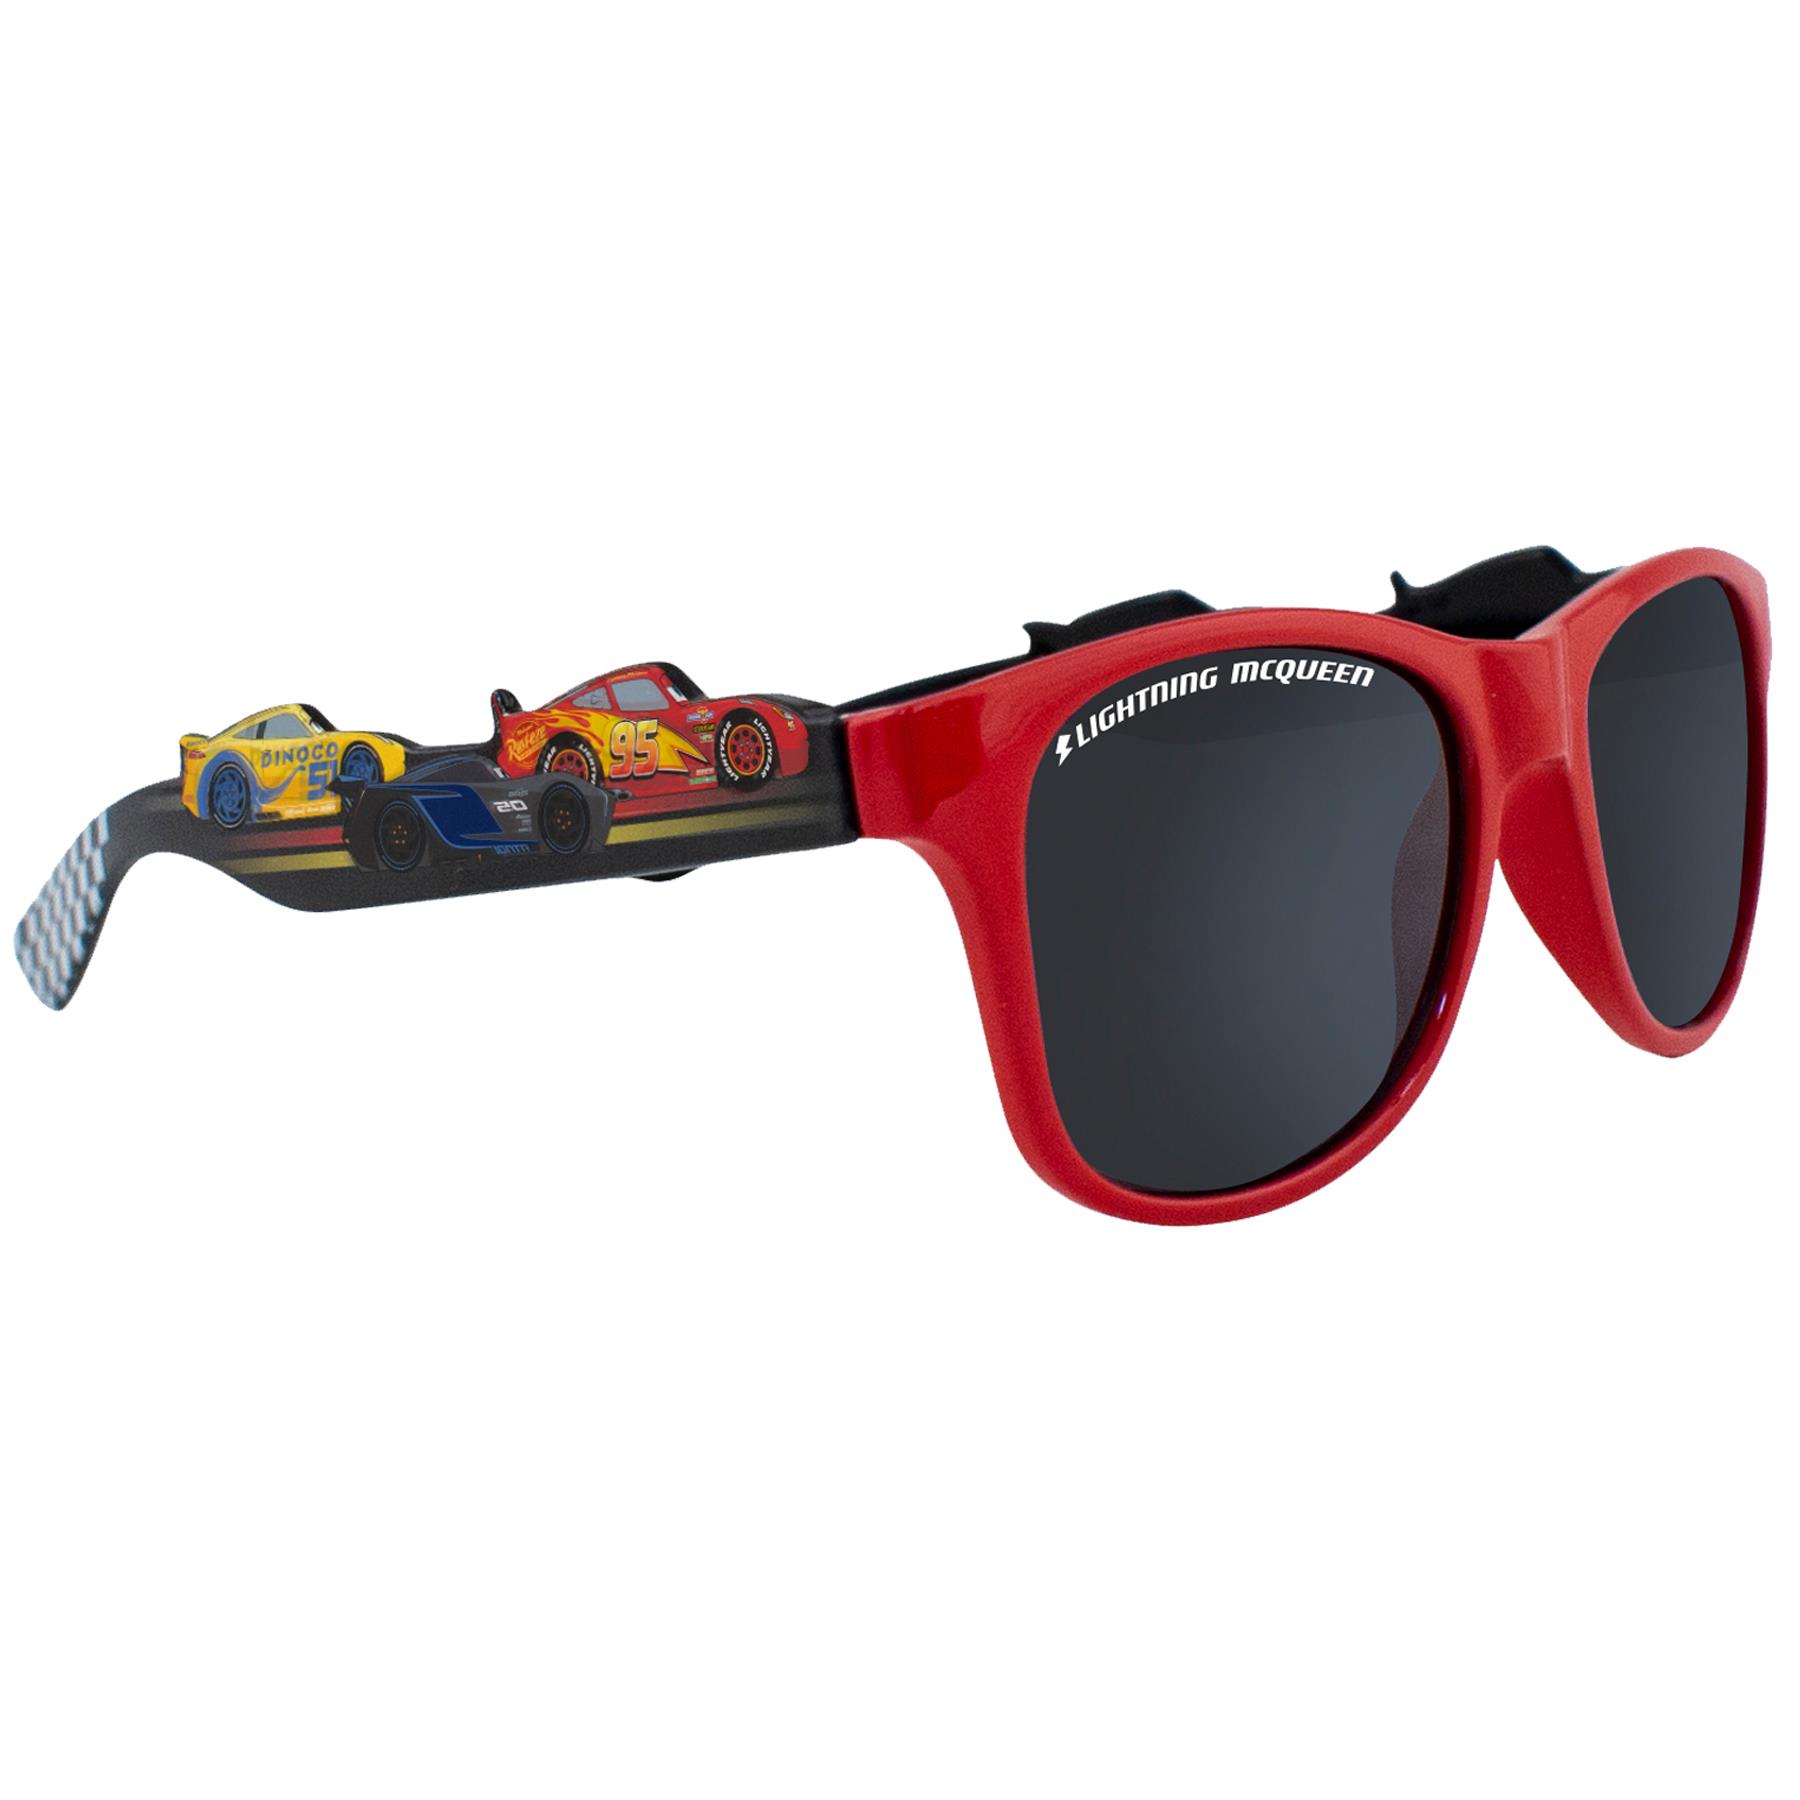 Disney Cars Children's Sunglasses UV protection for Holiday - CARS14